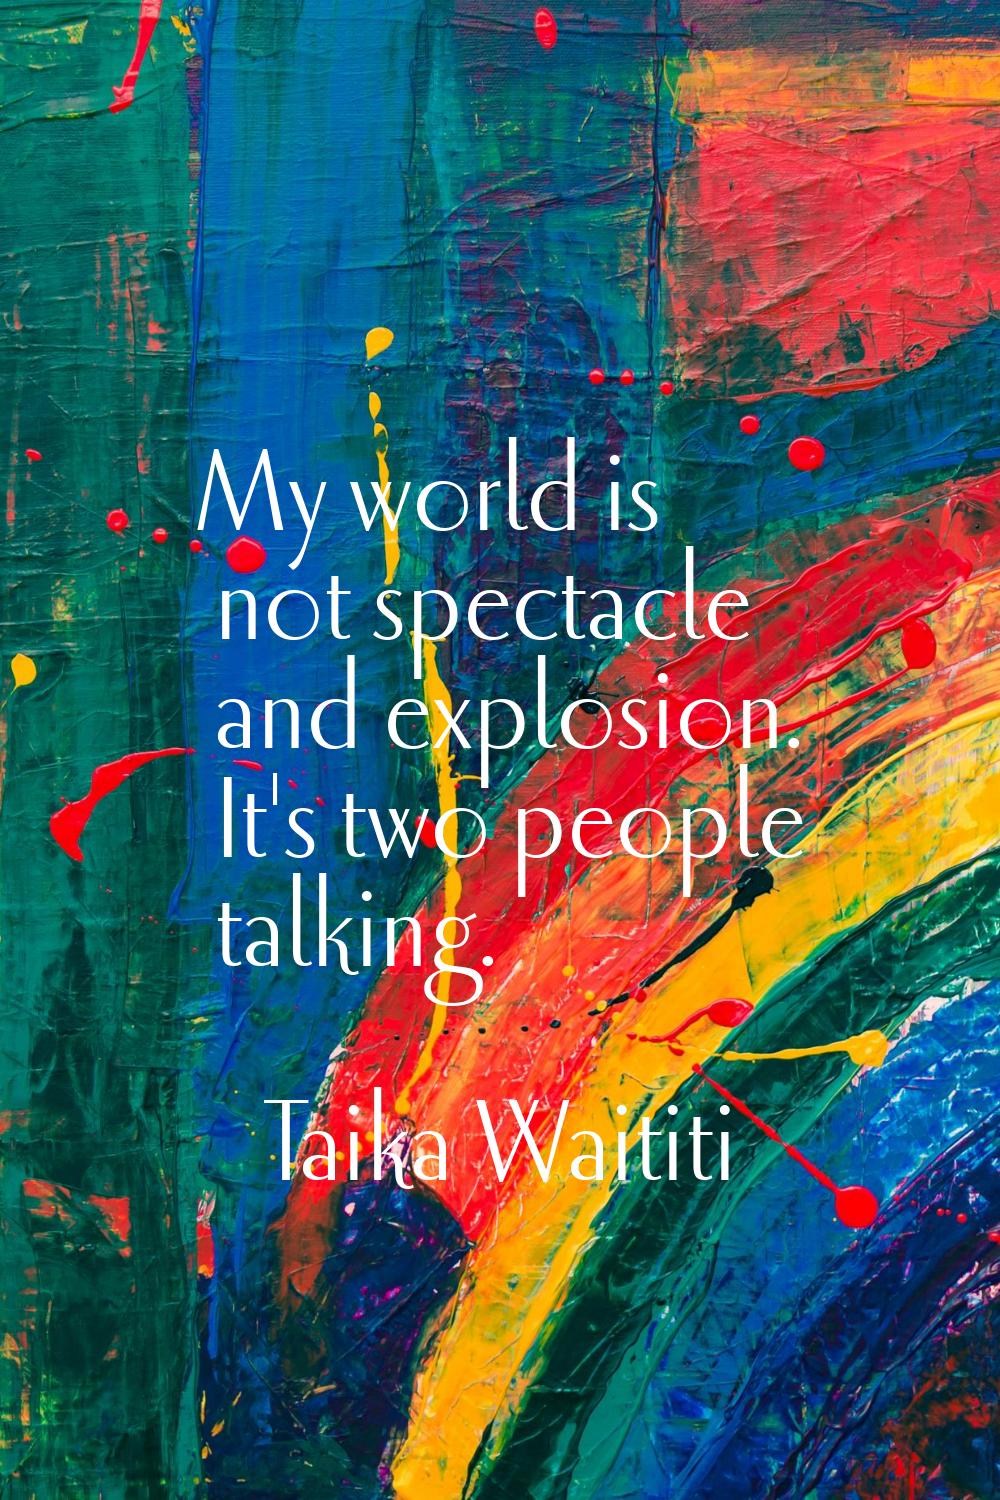 My world is not spectacle and explosion. It's two people talking.